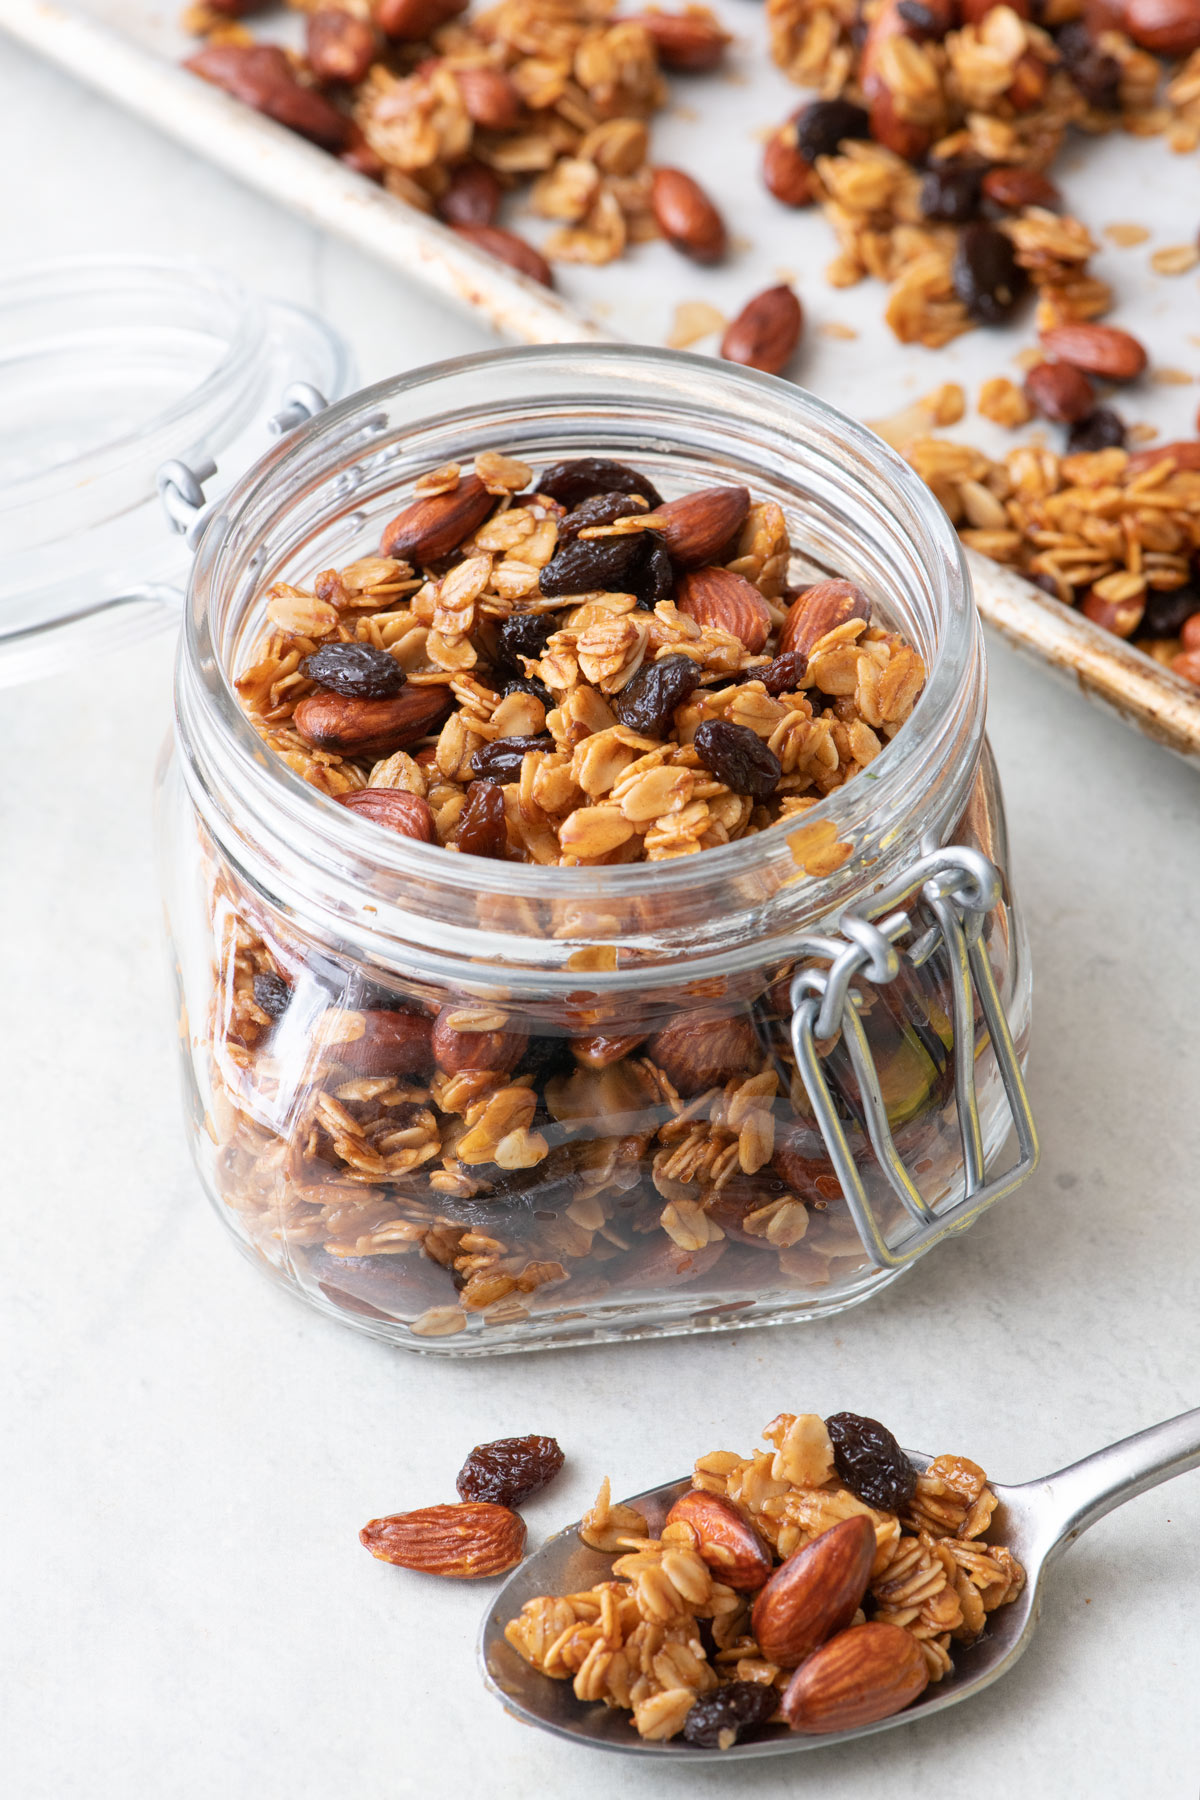 Small glass jar with lid opened and filled with granola with spoon nearby with some in it and some extra remaining on baking sheet behind jar.